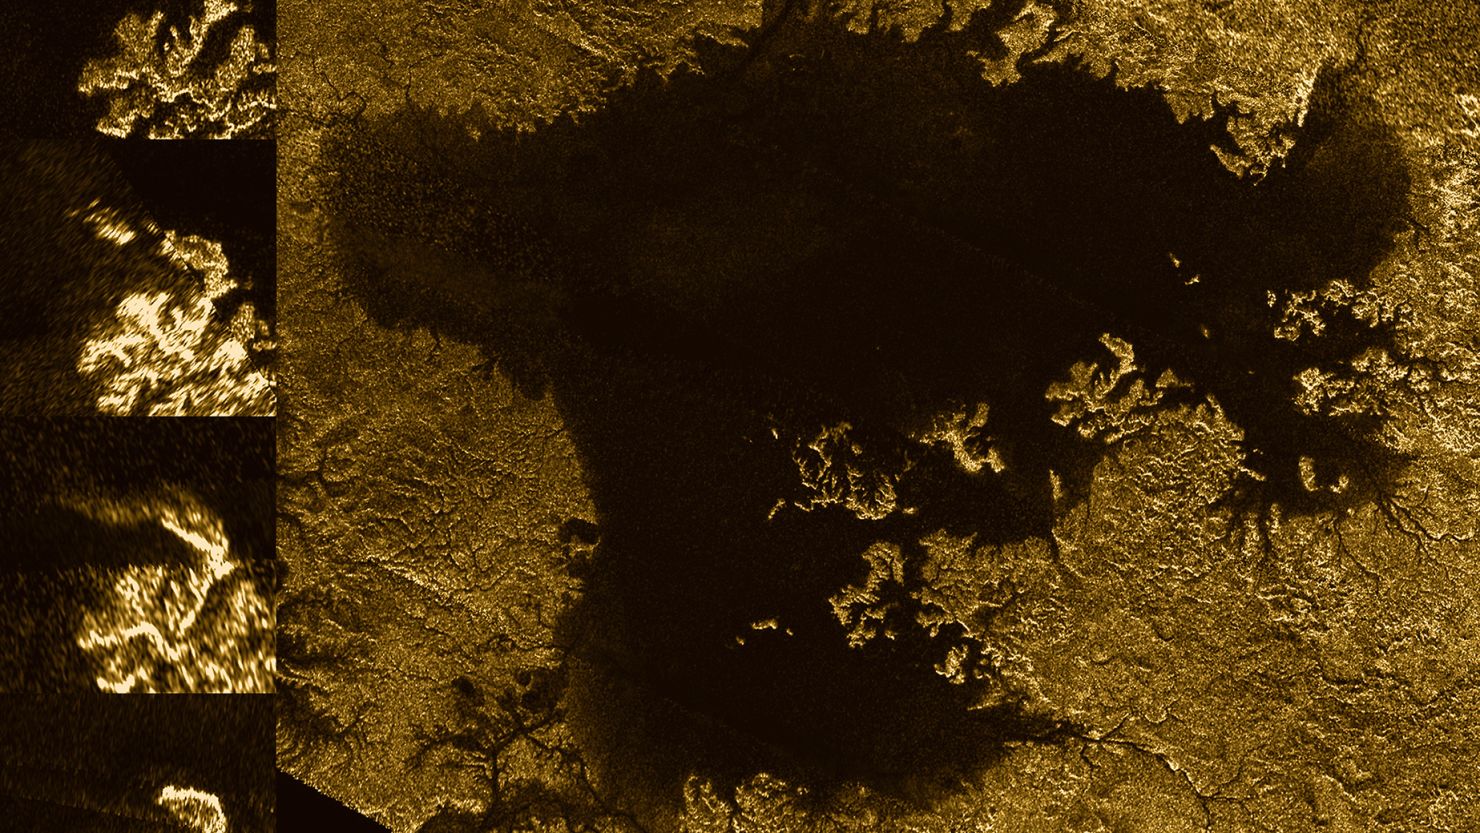 The Cassini spacecraft spied disappearing "magic islands" in a sea named Ligeia Mare on Saturn's moon Titan.